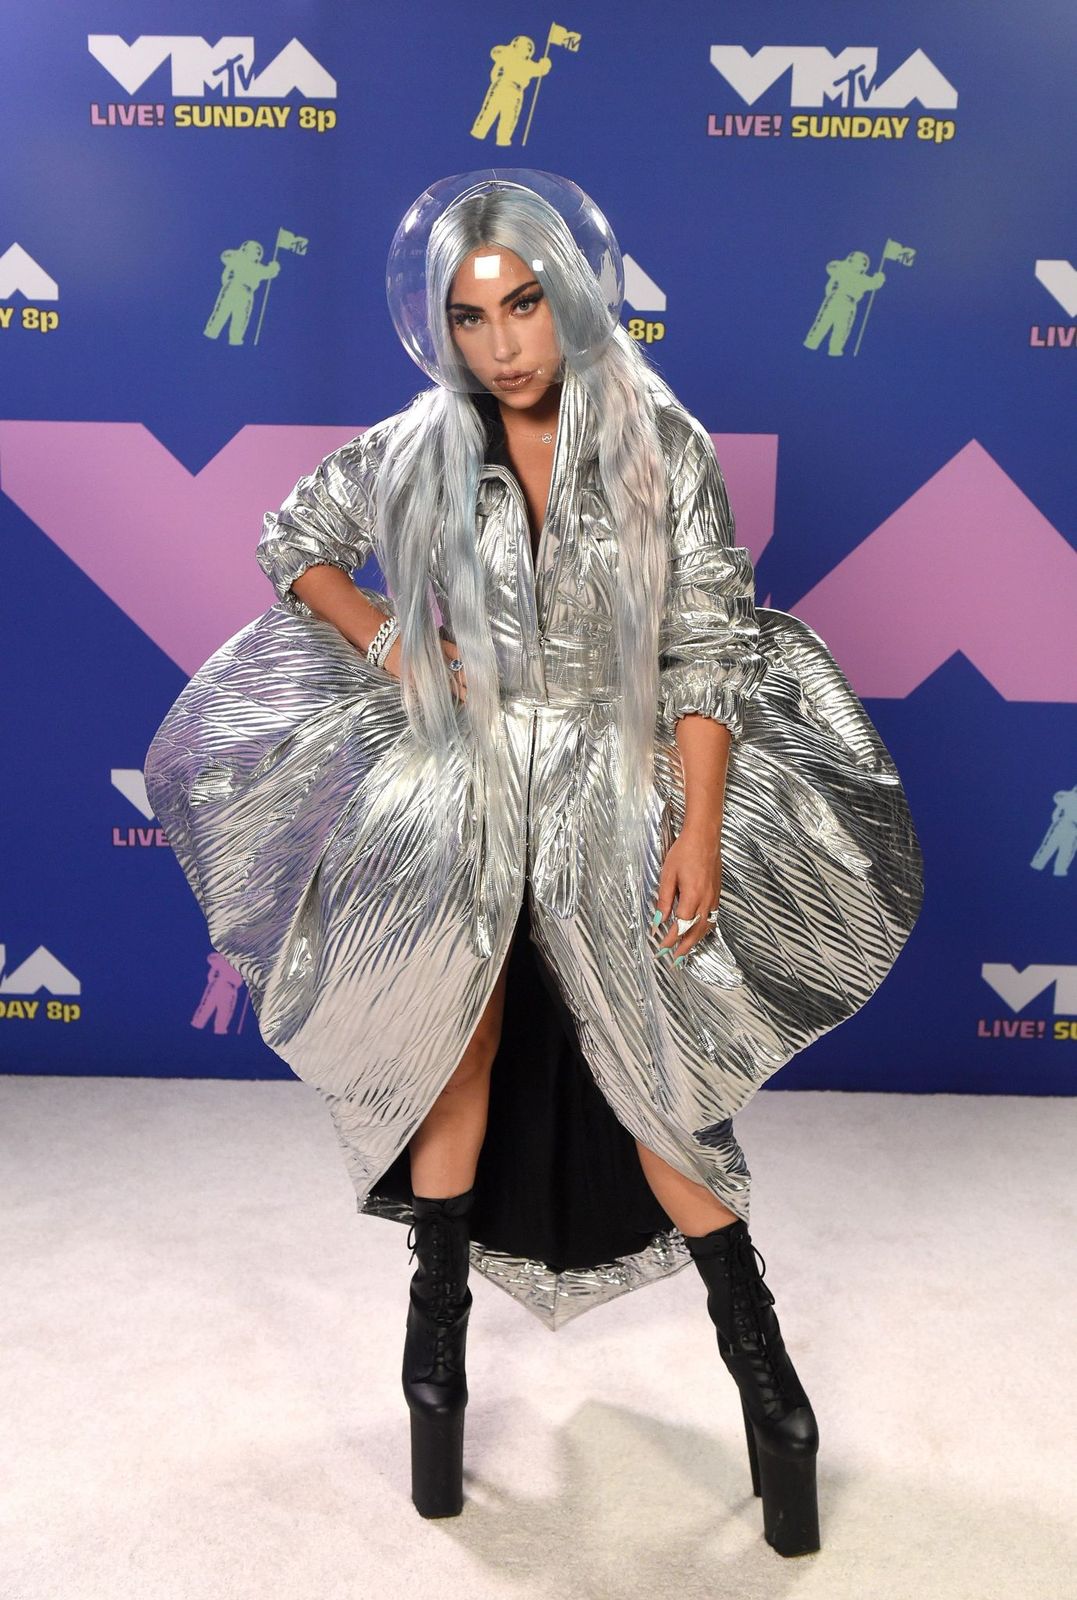 ady Gaga at the 2020 MTV Video Music Awards, broadcast on Sunday, August 30th 2020. | Getty Images